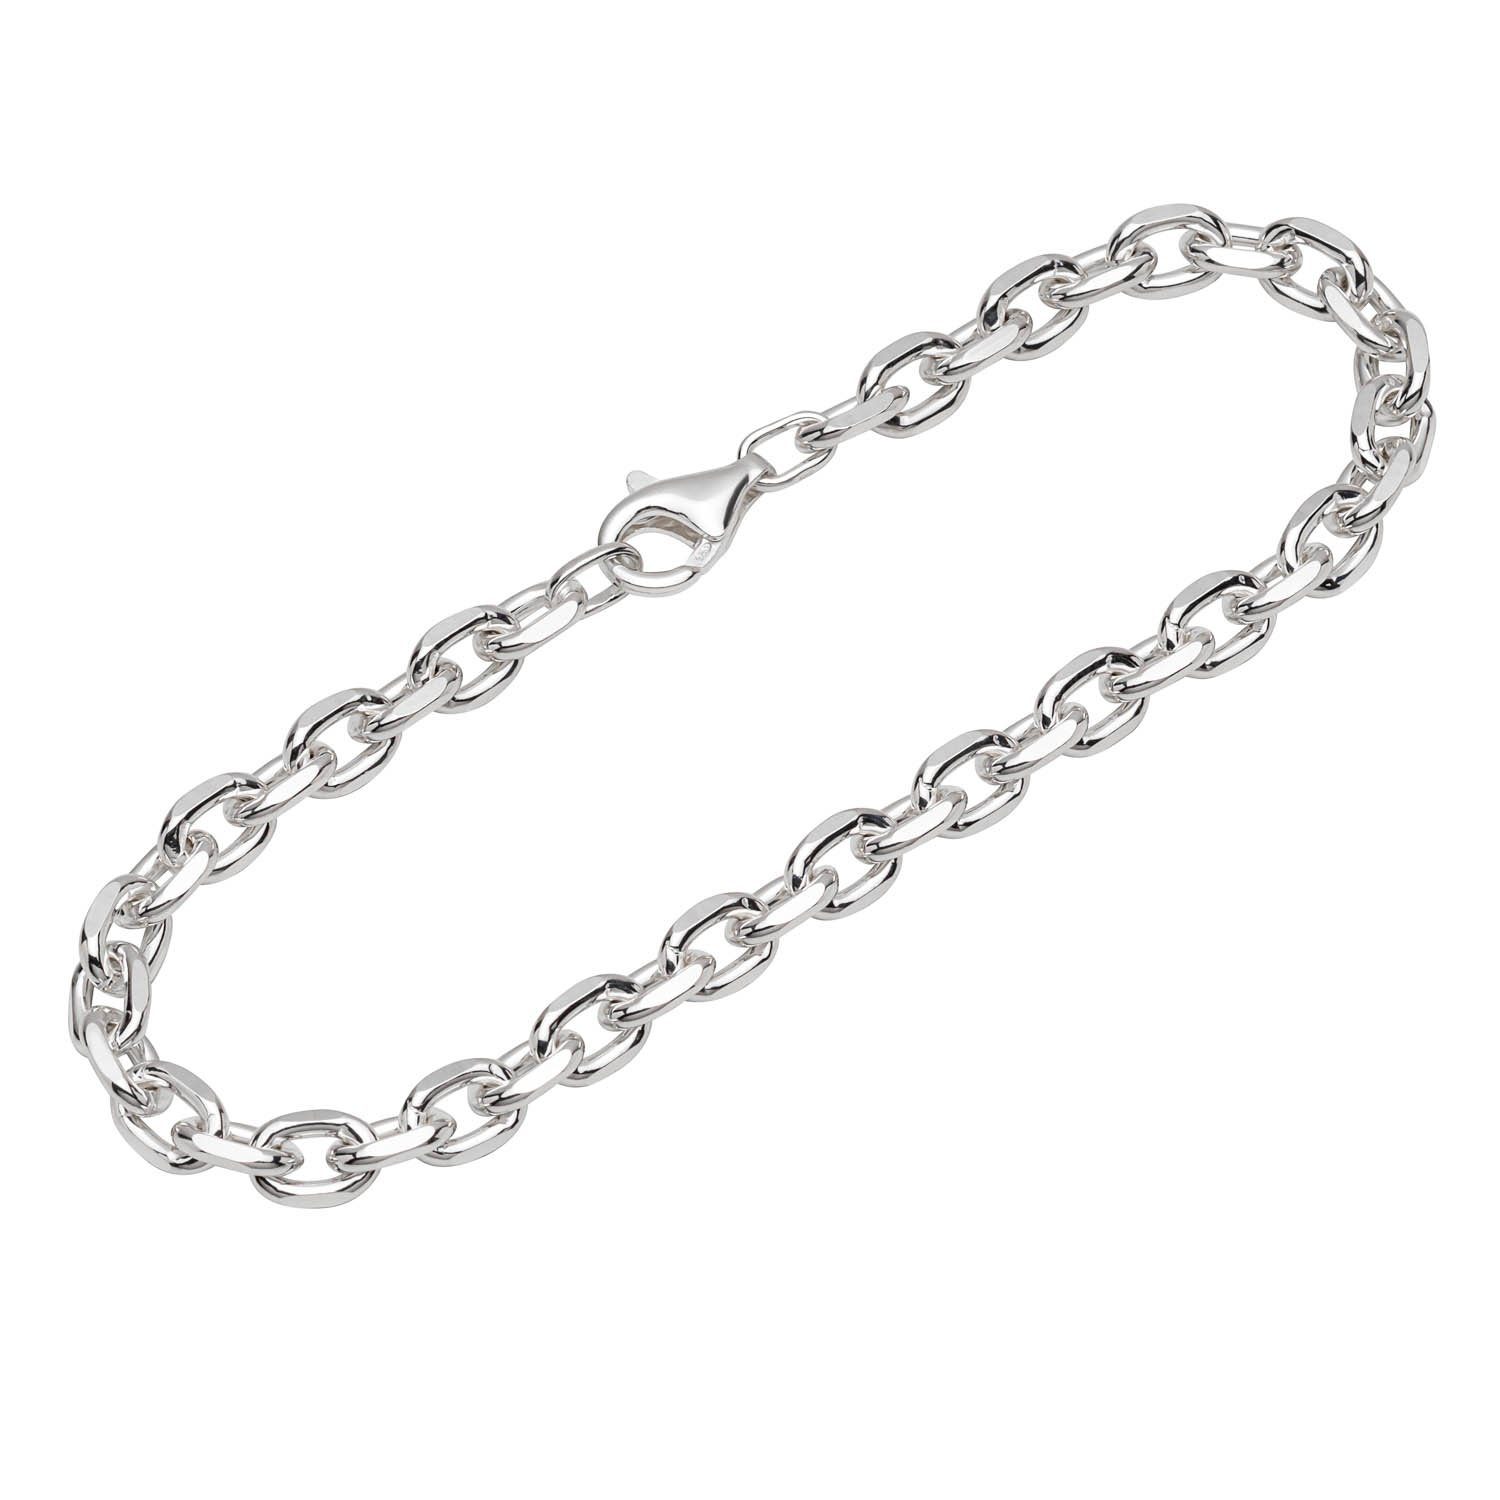 NKlaus Silberarmband Armband 925 Sterling Silber 22cm Ankerkette 4 fach (1 Stück), Made in Germany